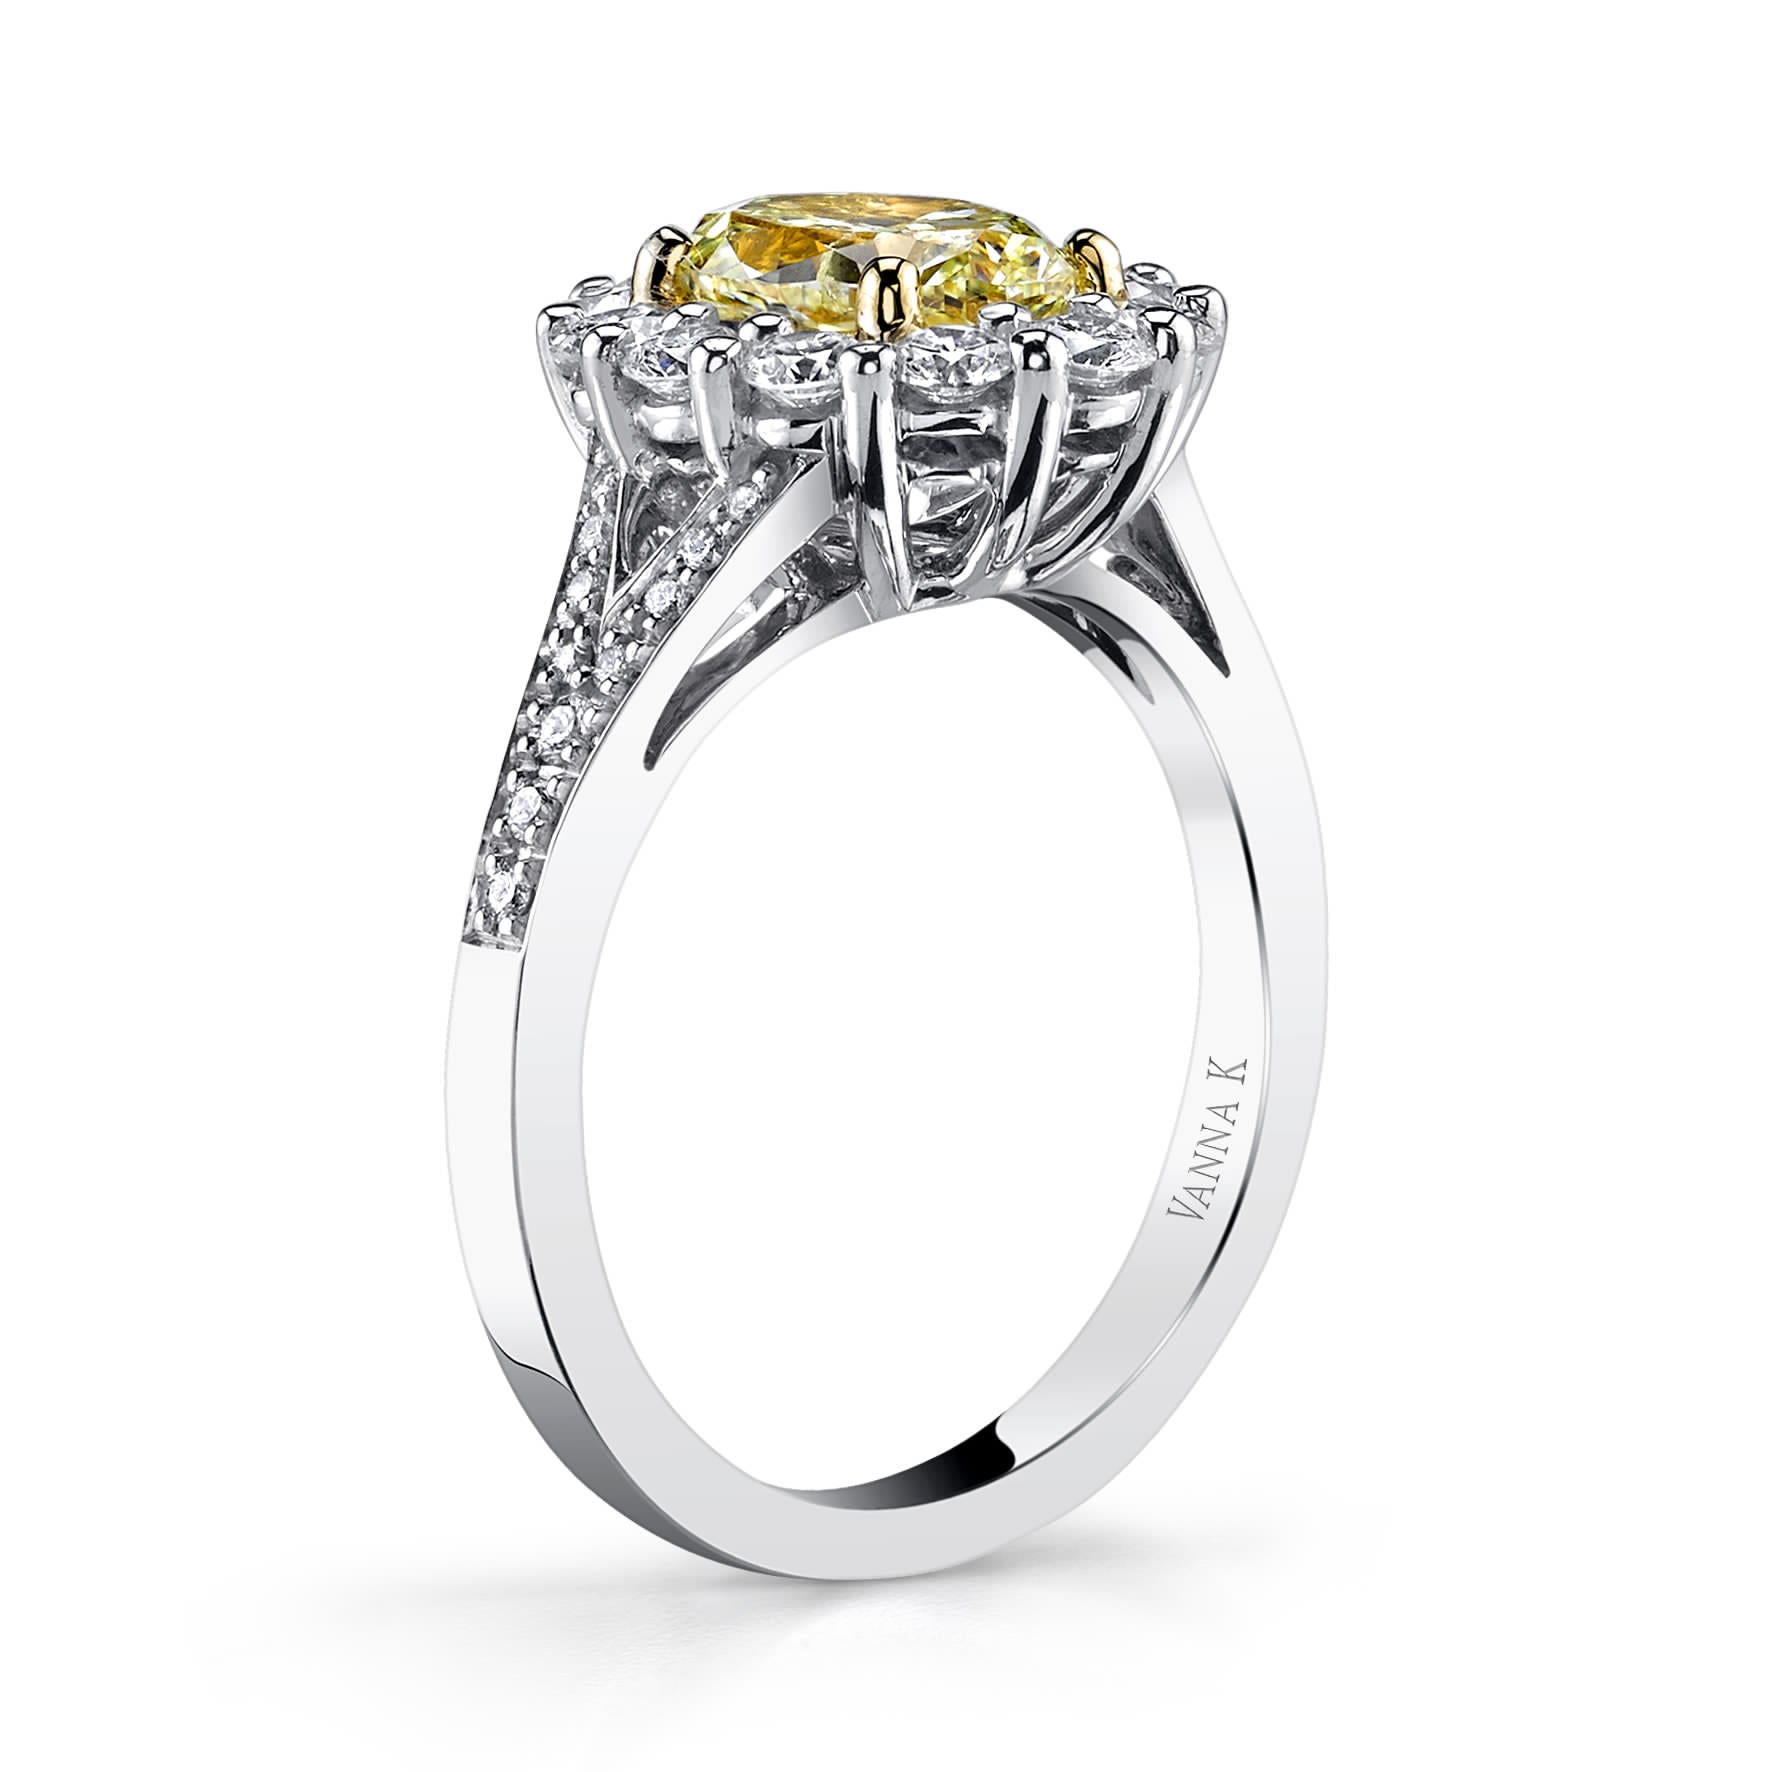 Soleamore Unique Rare Yellow Diamond Ring Style 18RGL38DY